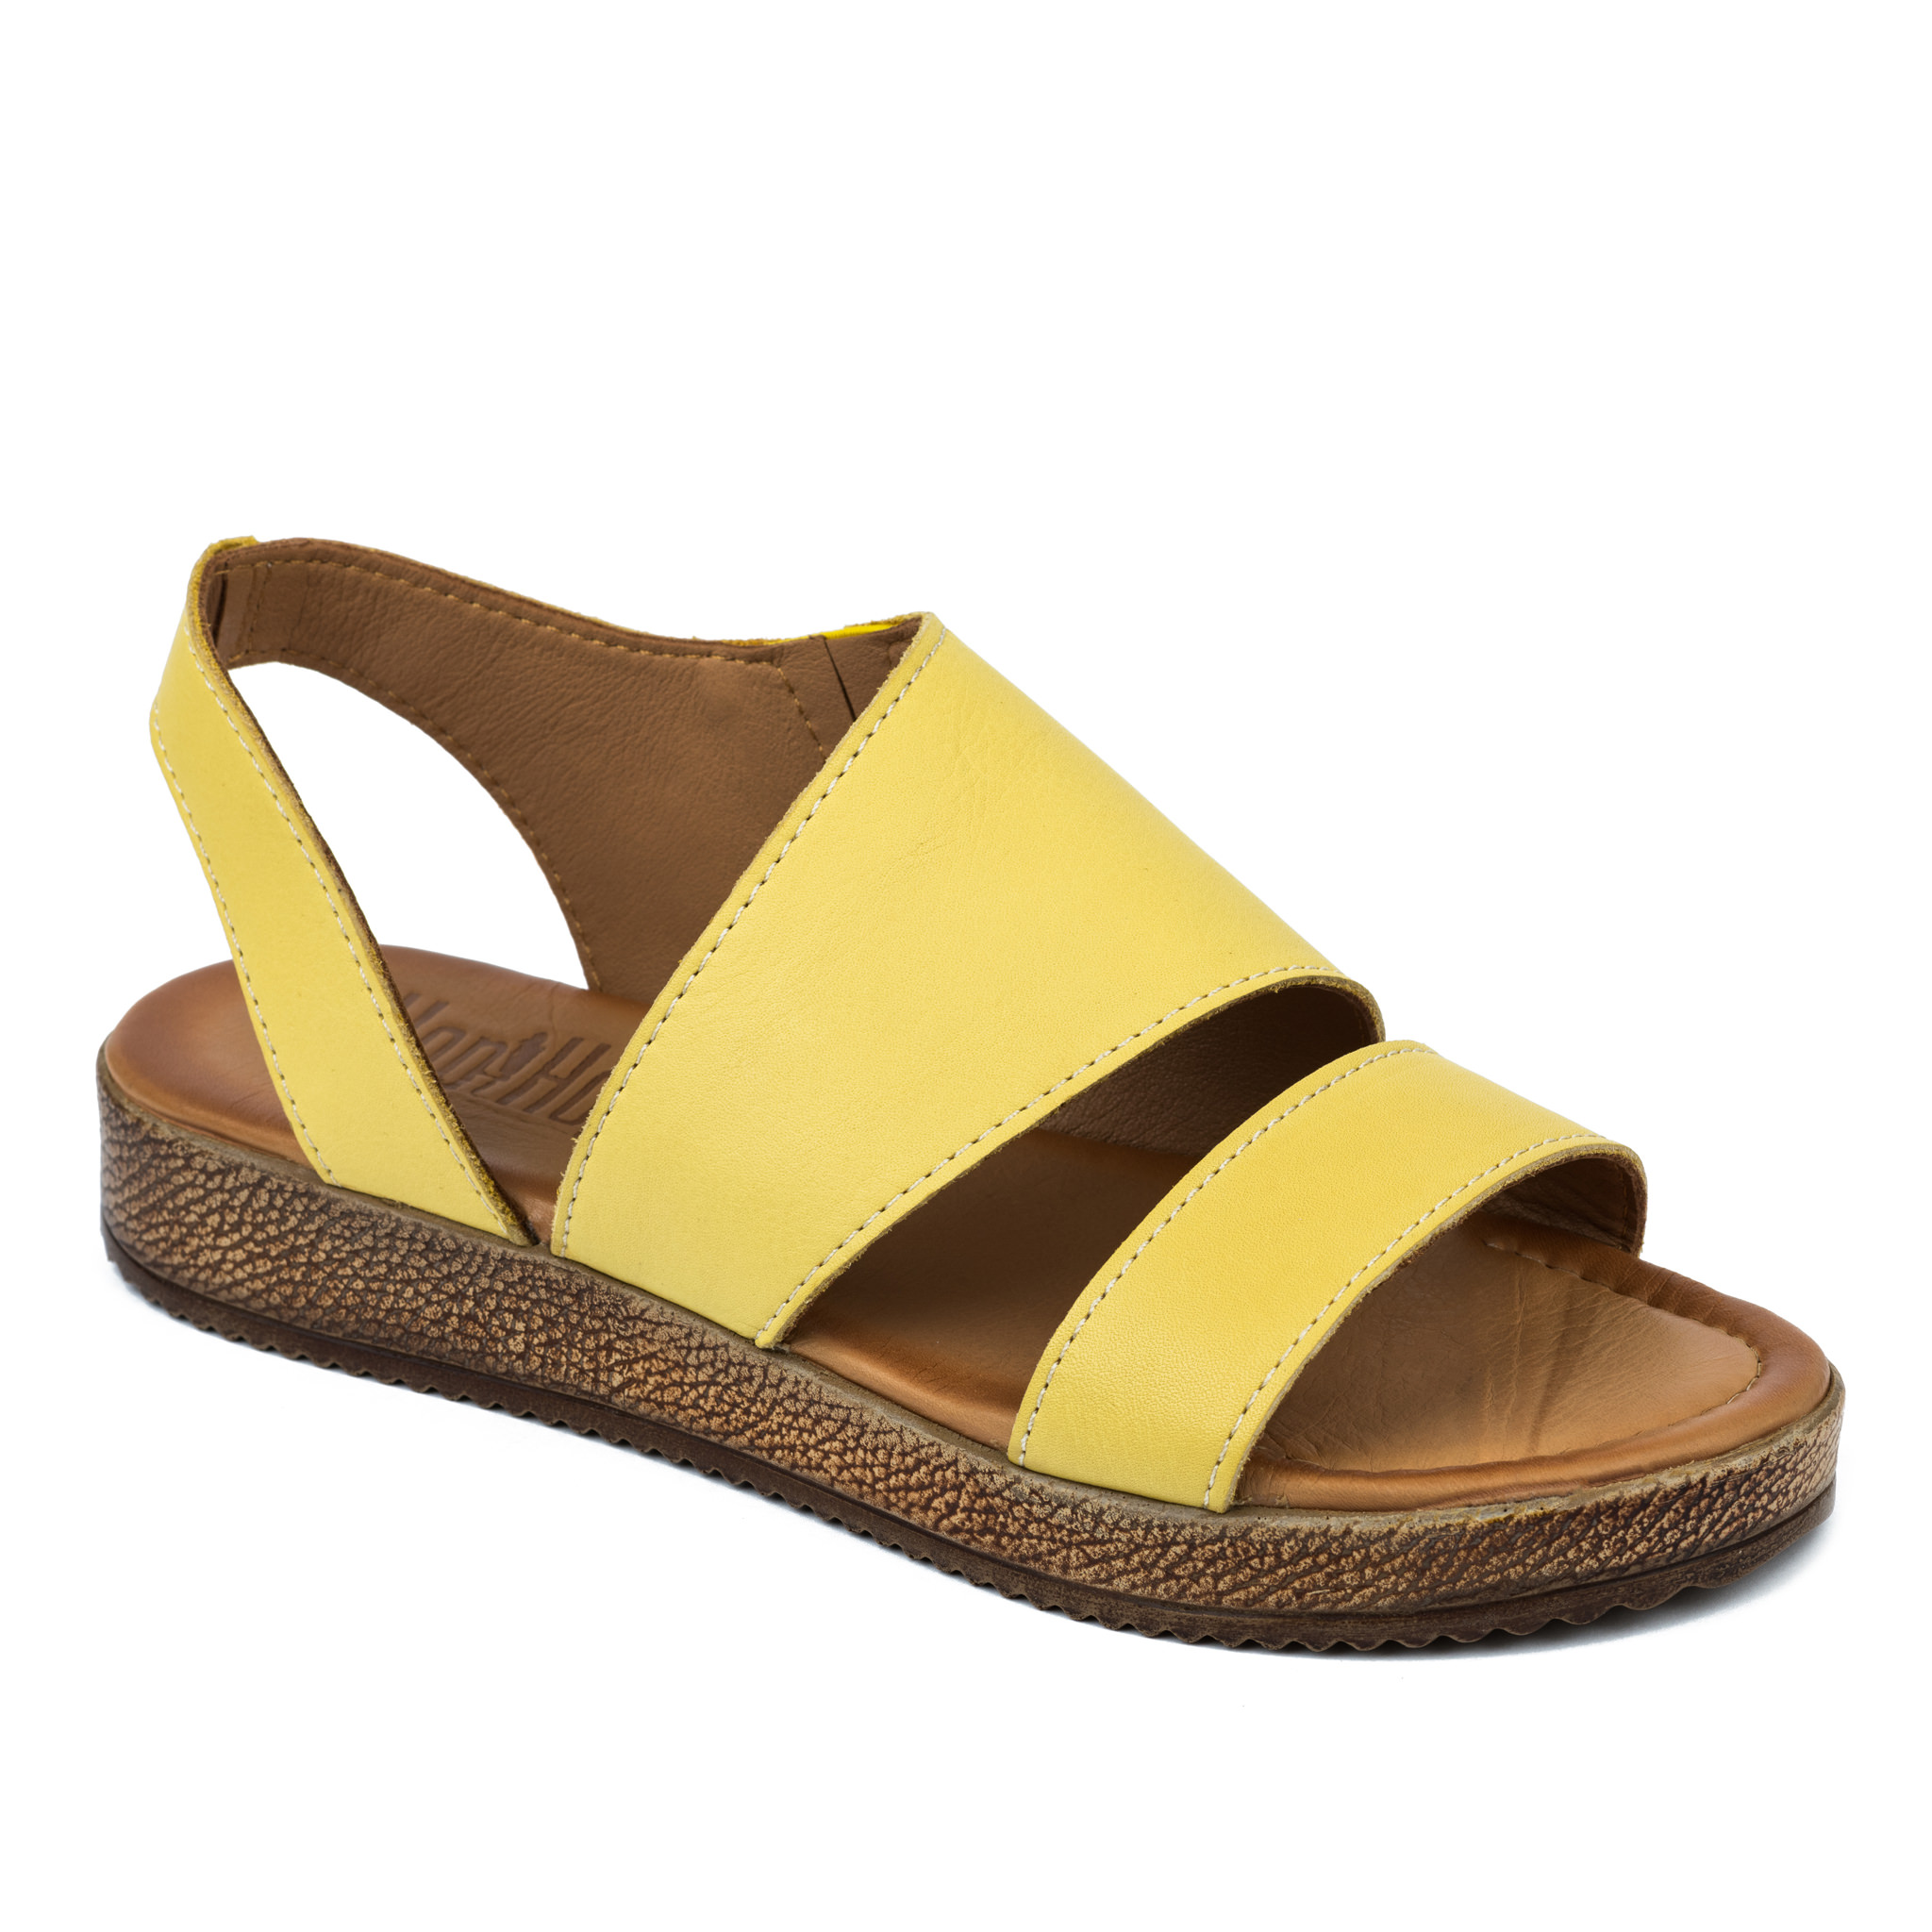 Leather sandals A683 - YELLOW